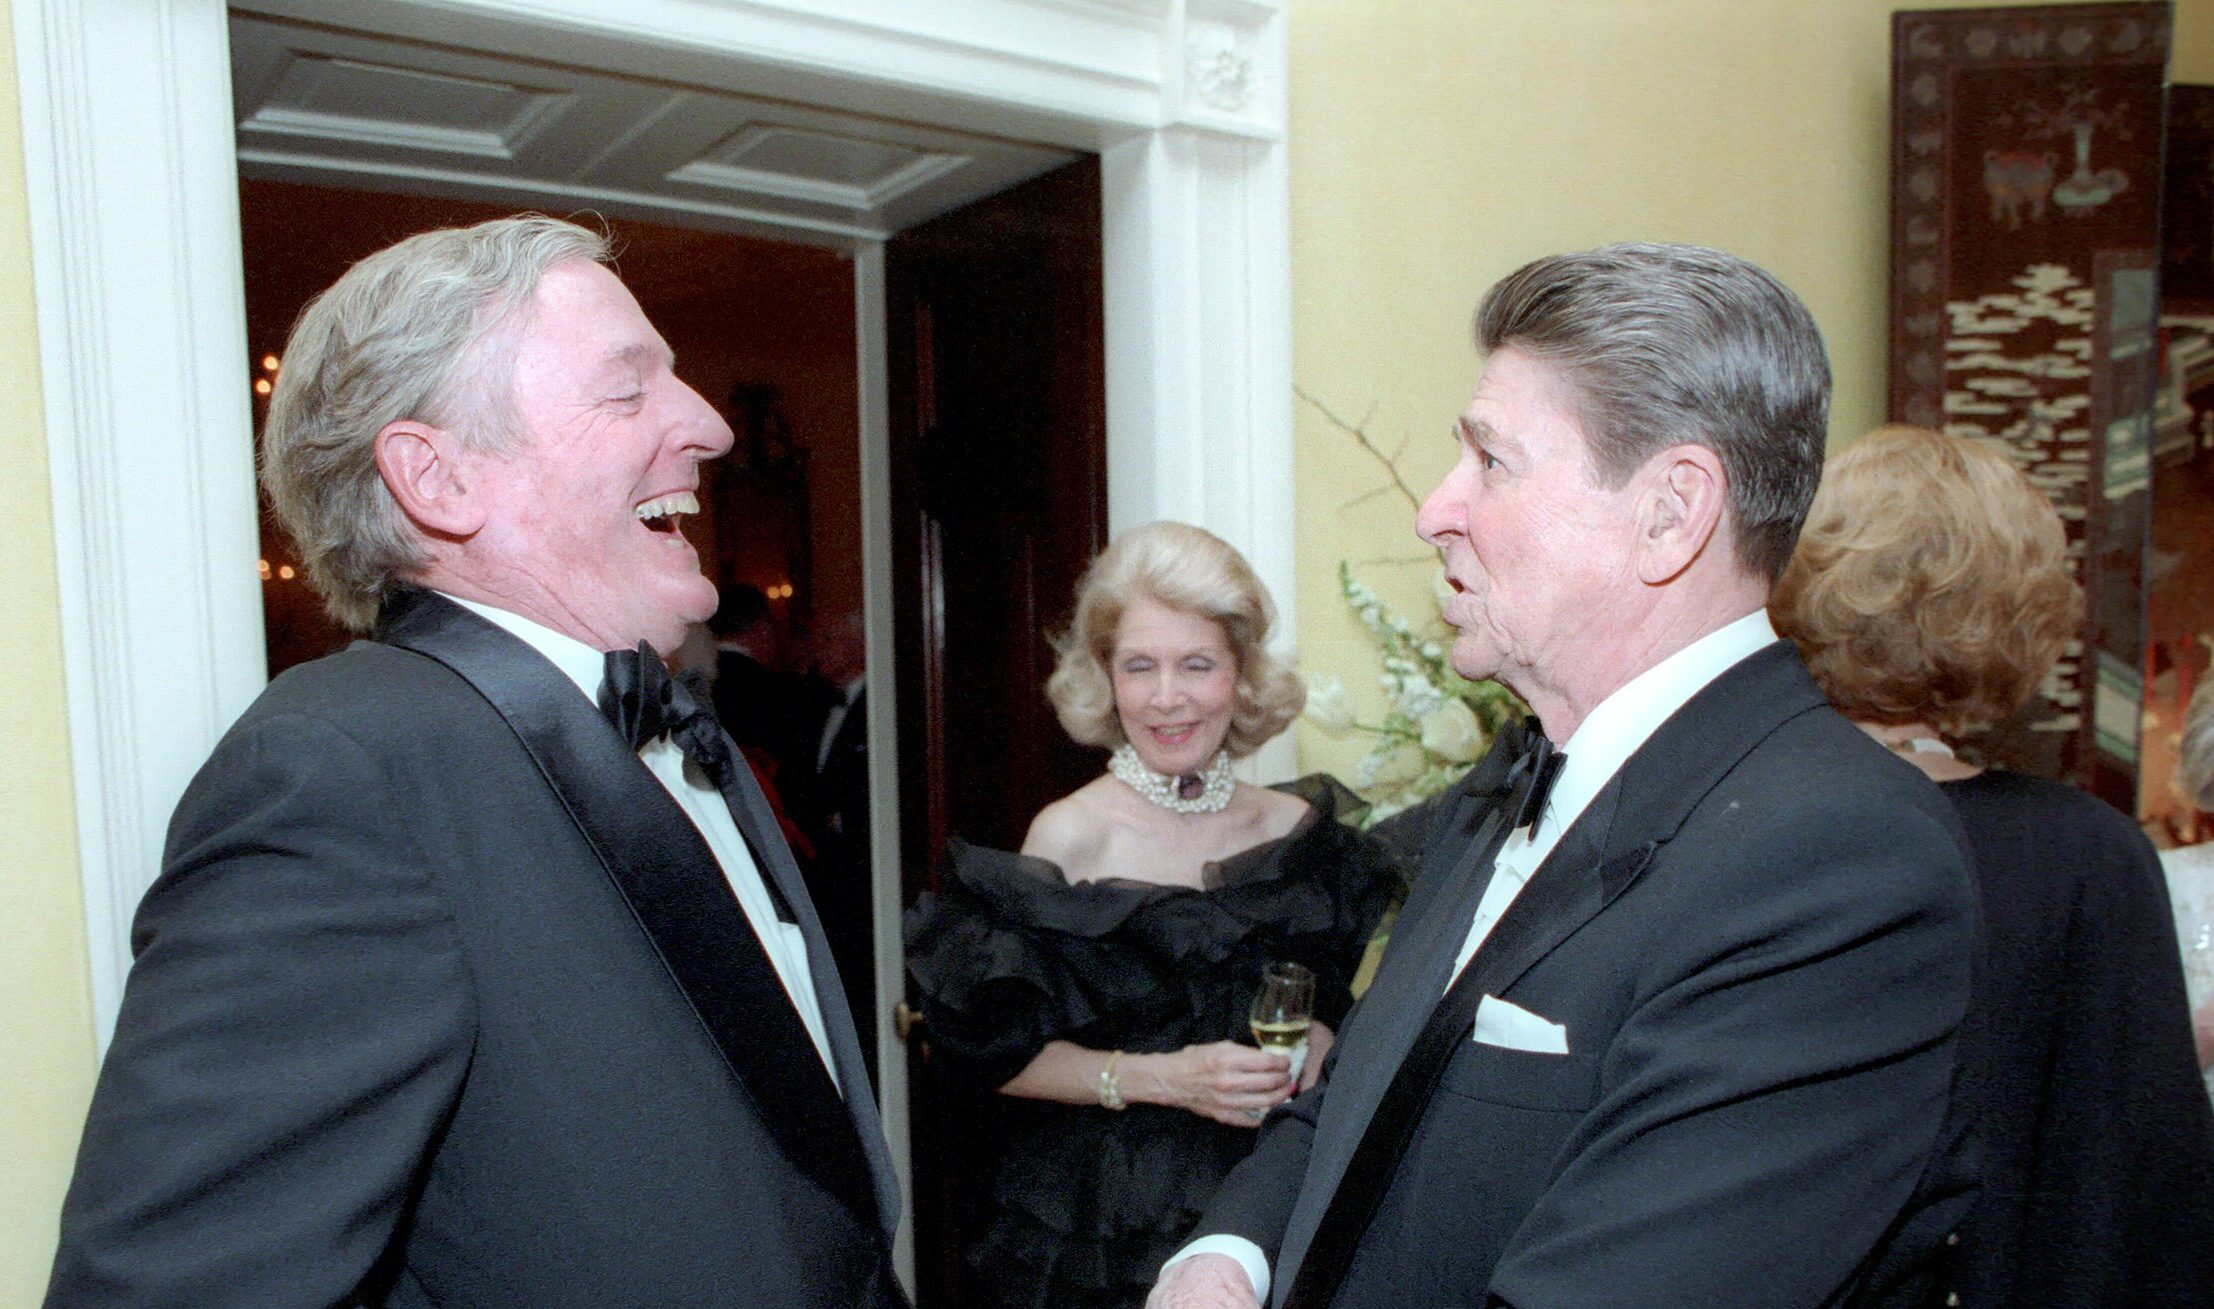 President Reagan with William F. Buckley Jr. in the White House Residence in honor of President Reagan's 75th Birthday (Wikimedia Commons/CC0 1.0 DEED license)